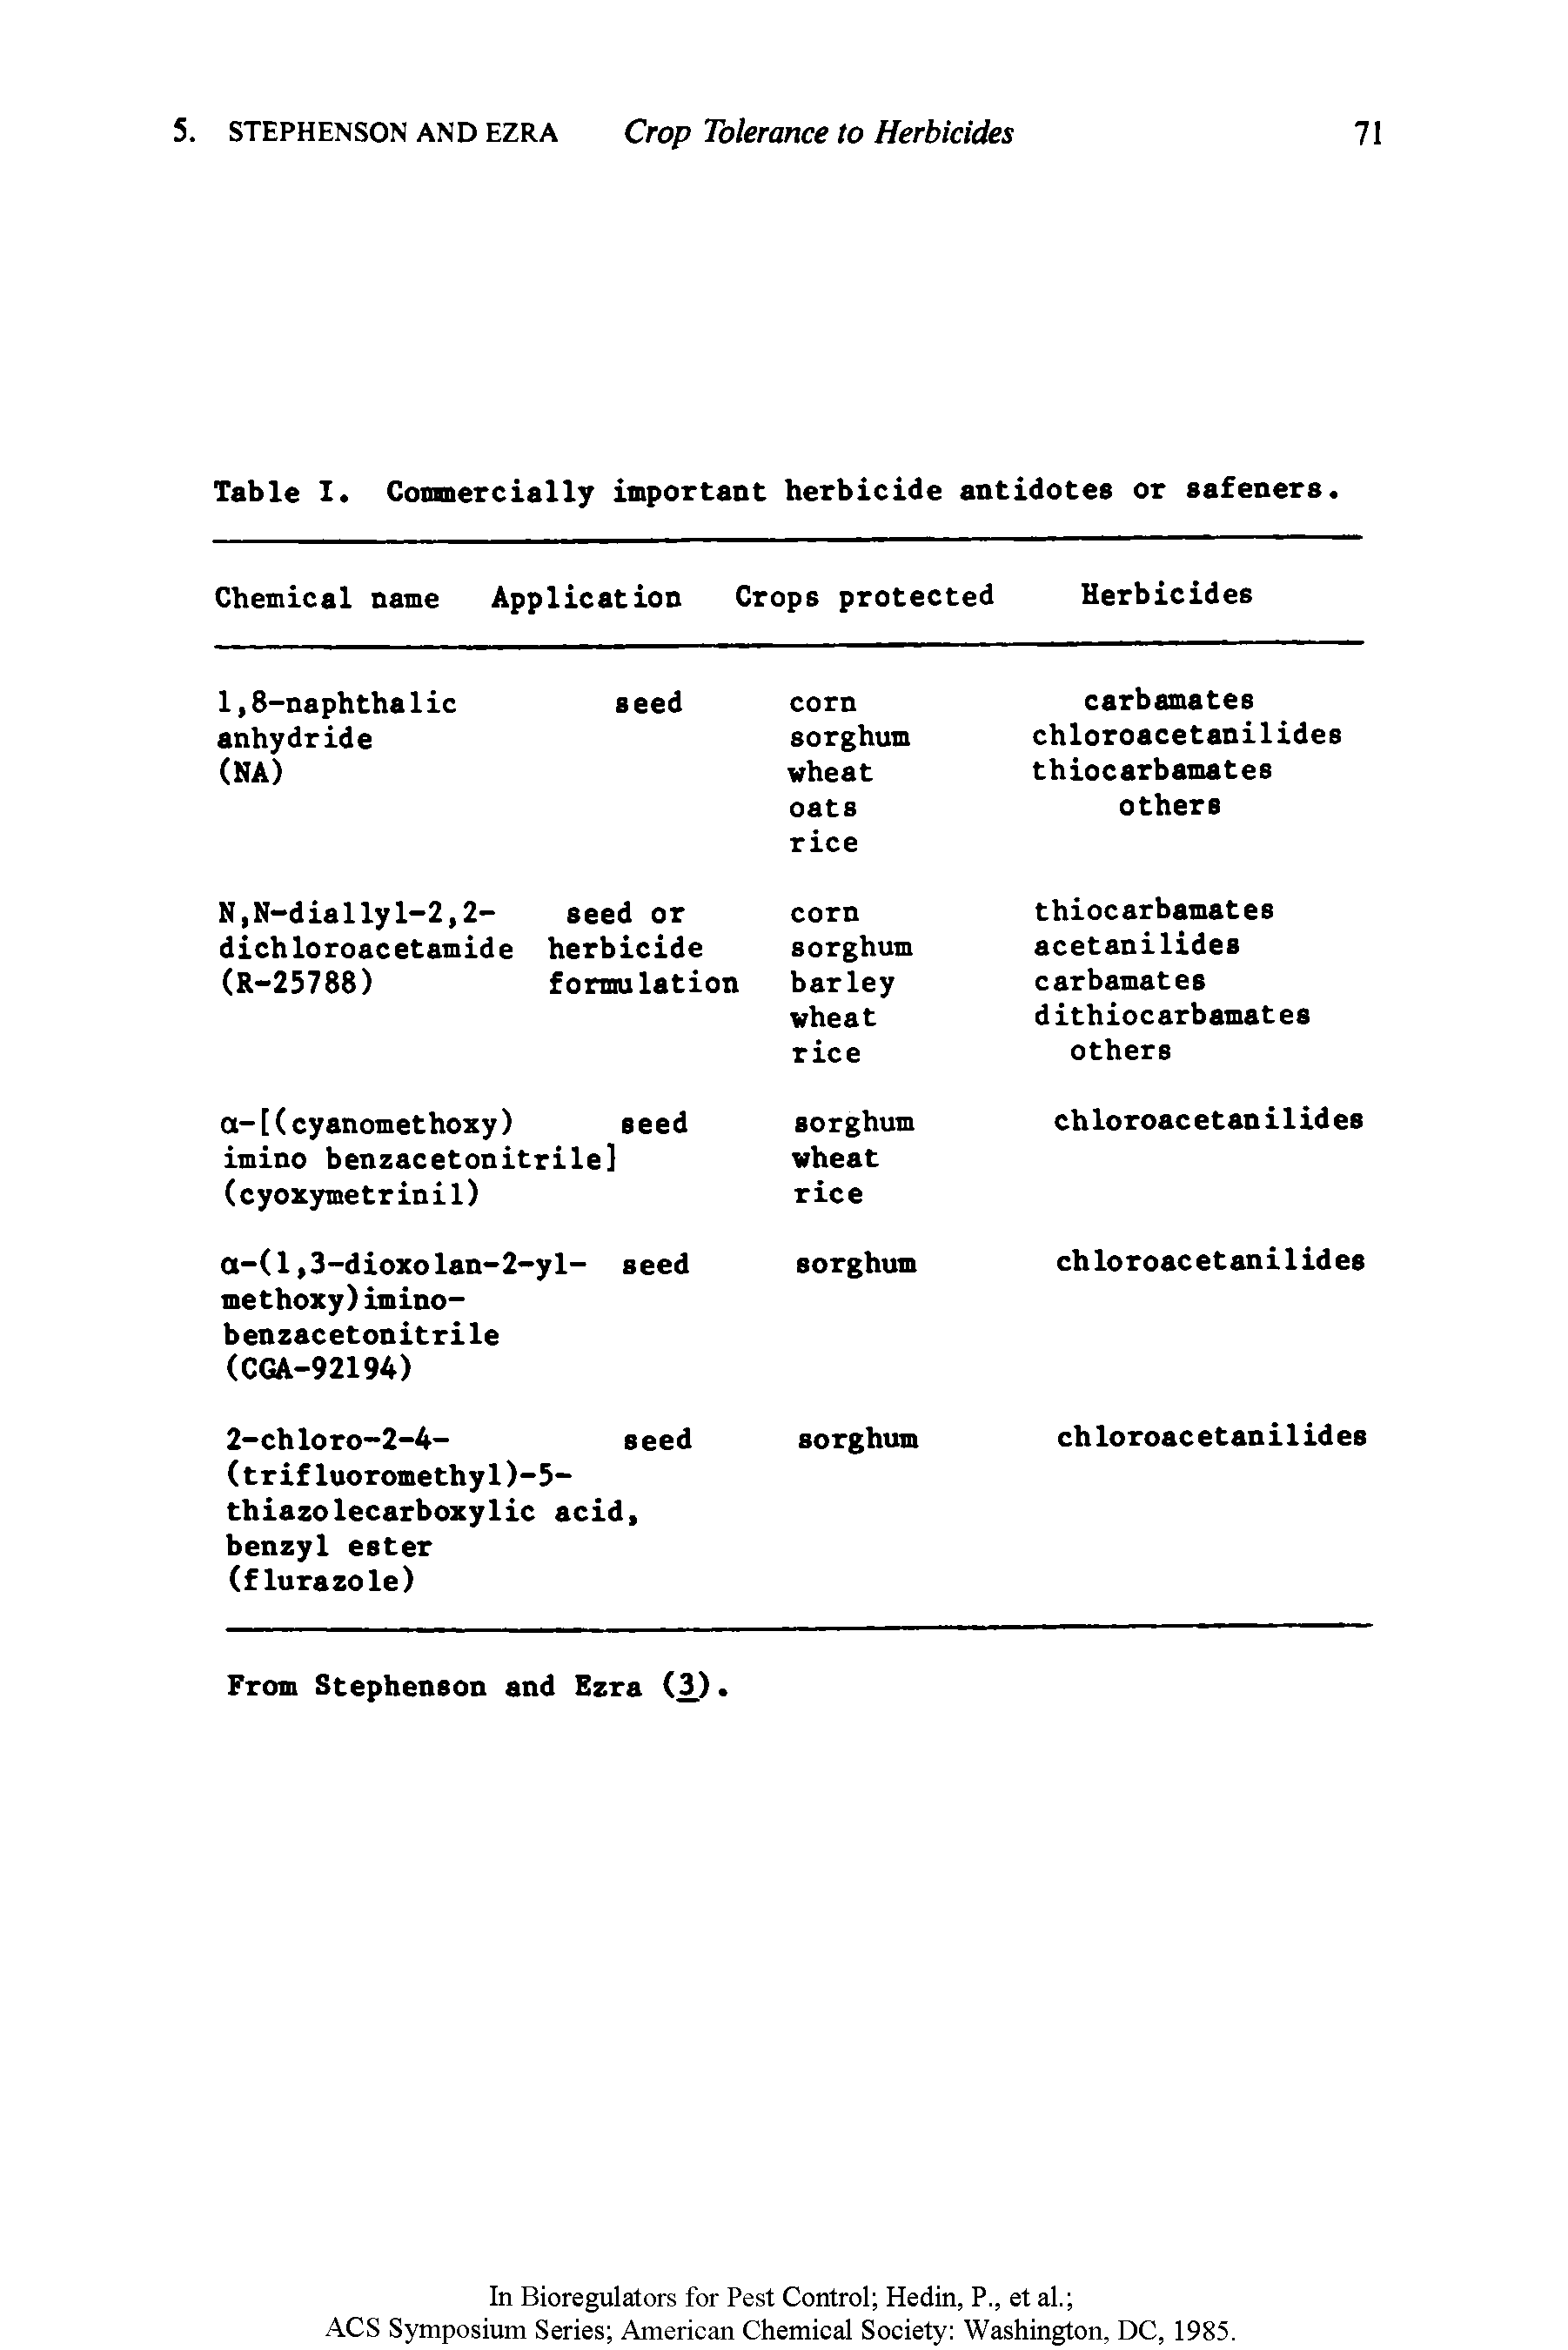 Table I. Conmercially important herbicide antidotes or safeners.